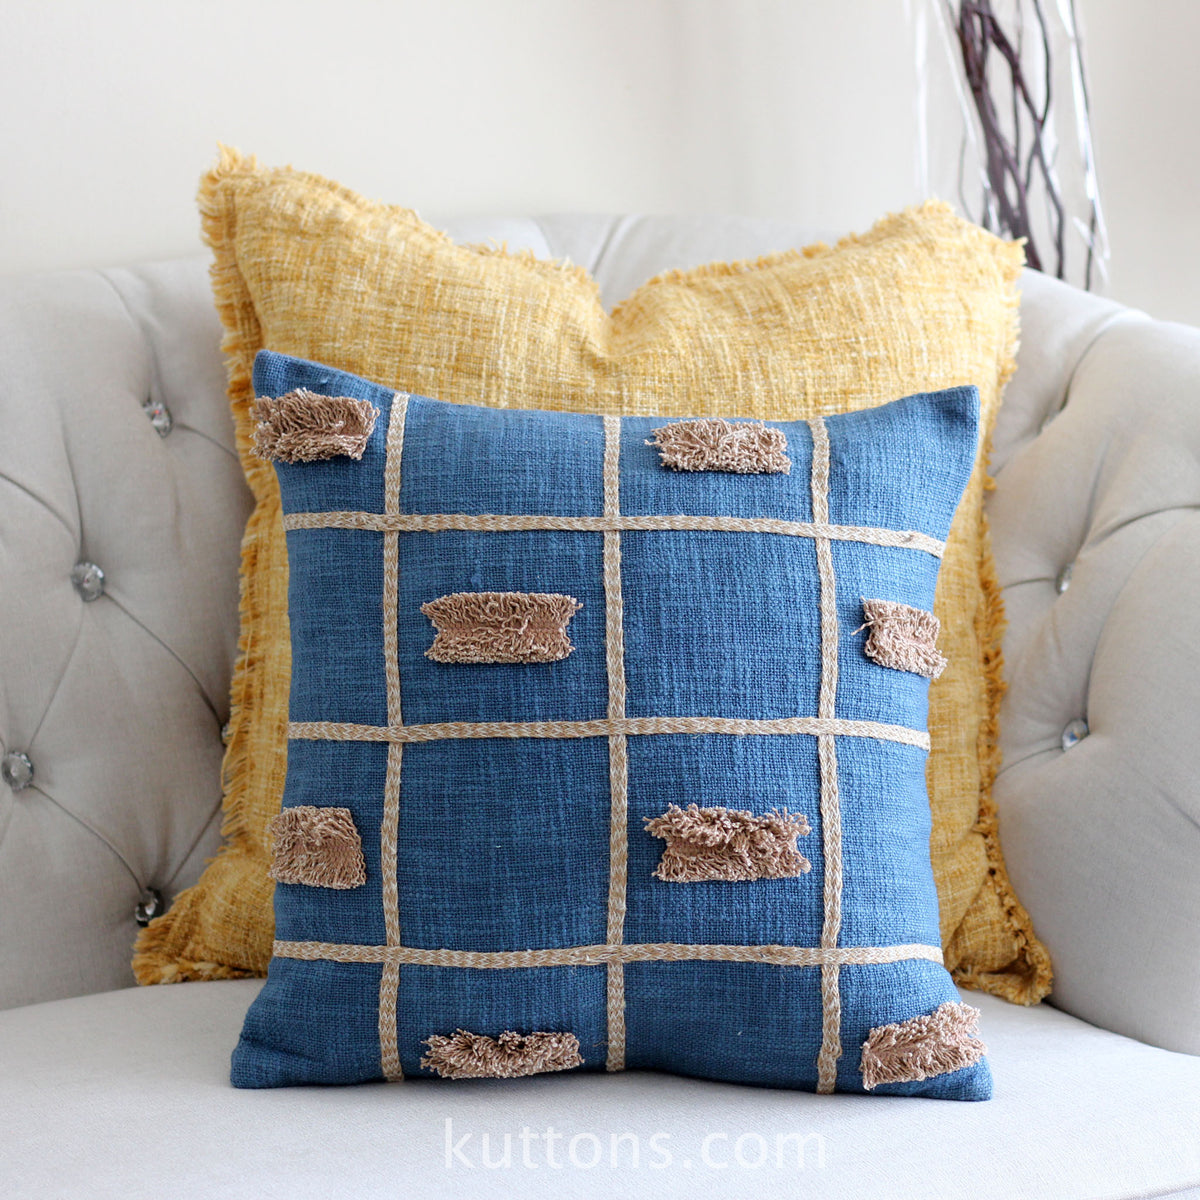 Handcrafted Square Box Cotton Jute Throw Pillow Cover - Decorative Cushions | Blue